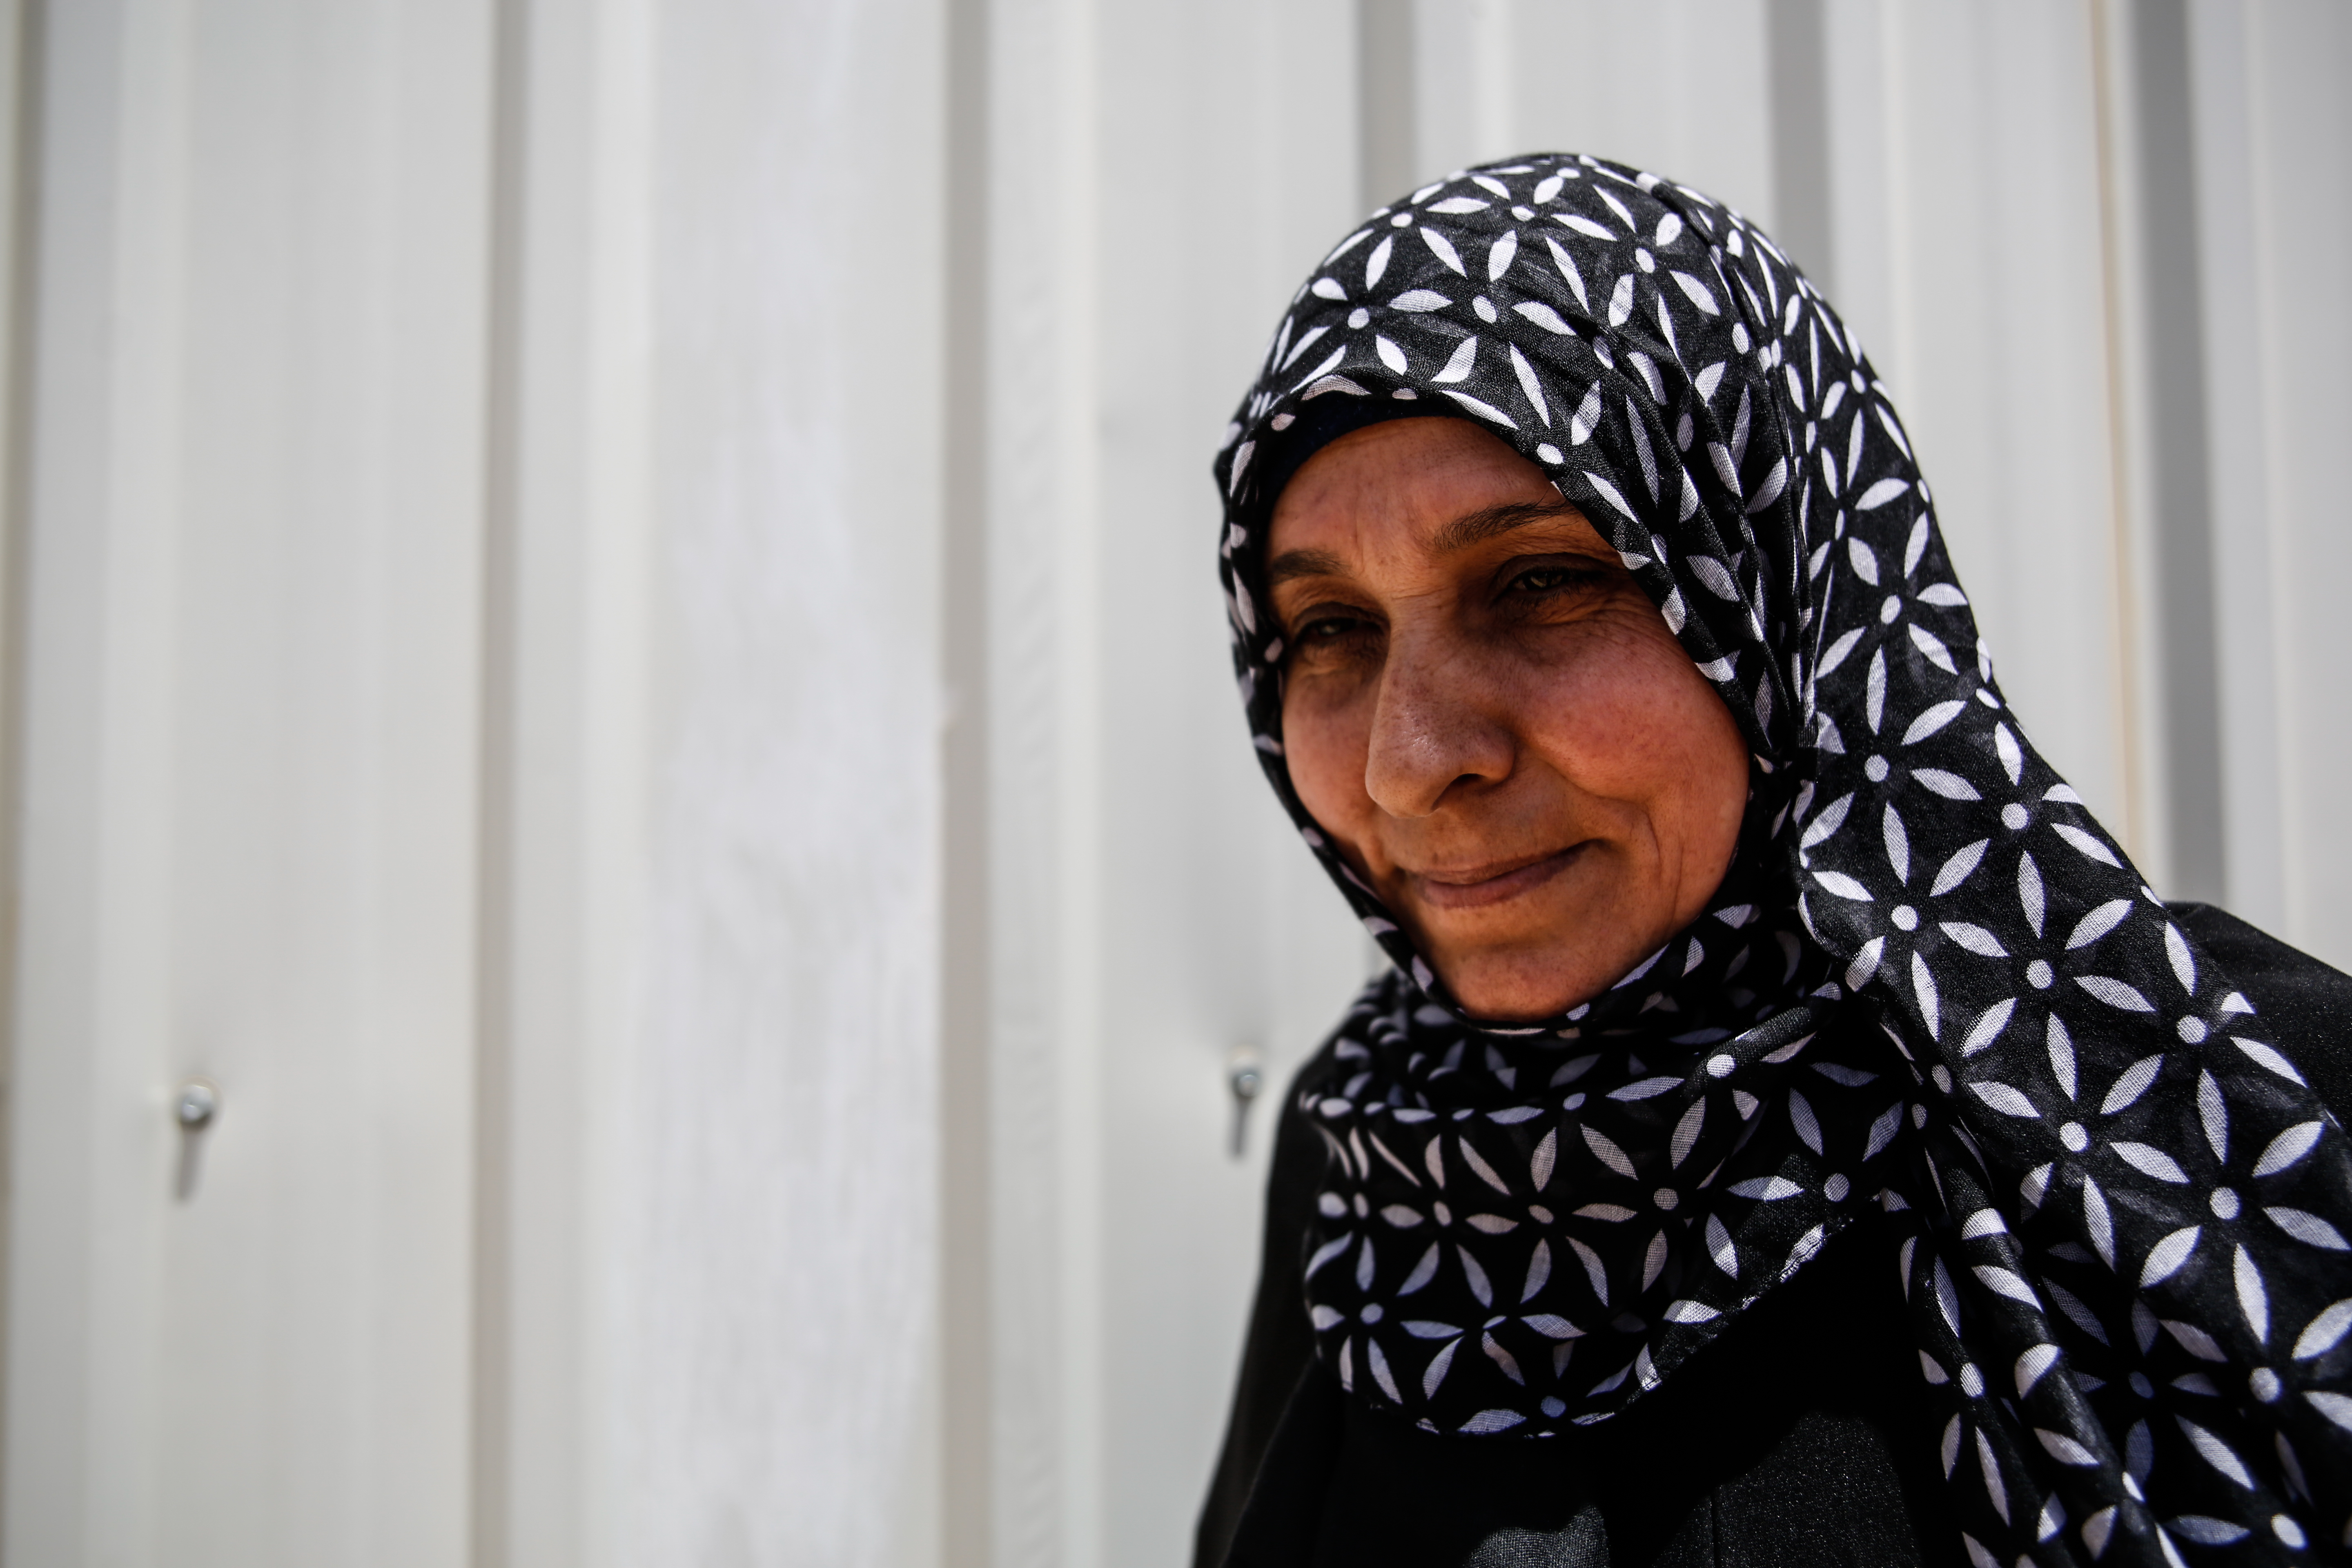 Falha Abrabo, 48, fled Syria to find safety for her family in Za’atari refugee camp in 2012. Photo: UN Women/Lauren Rooney